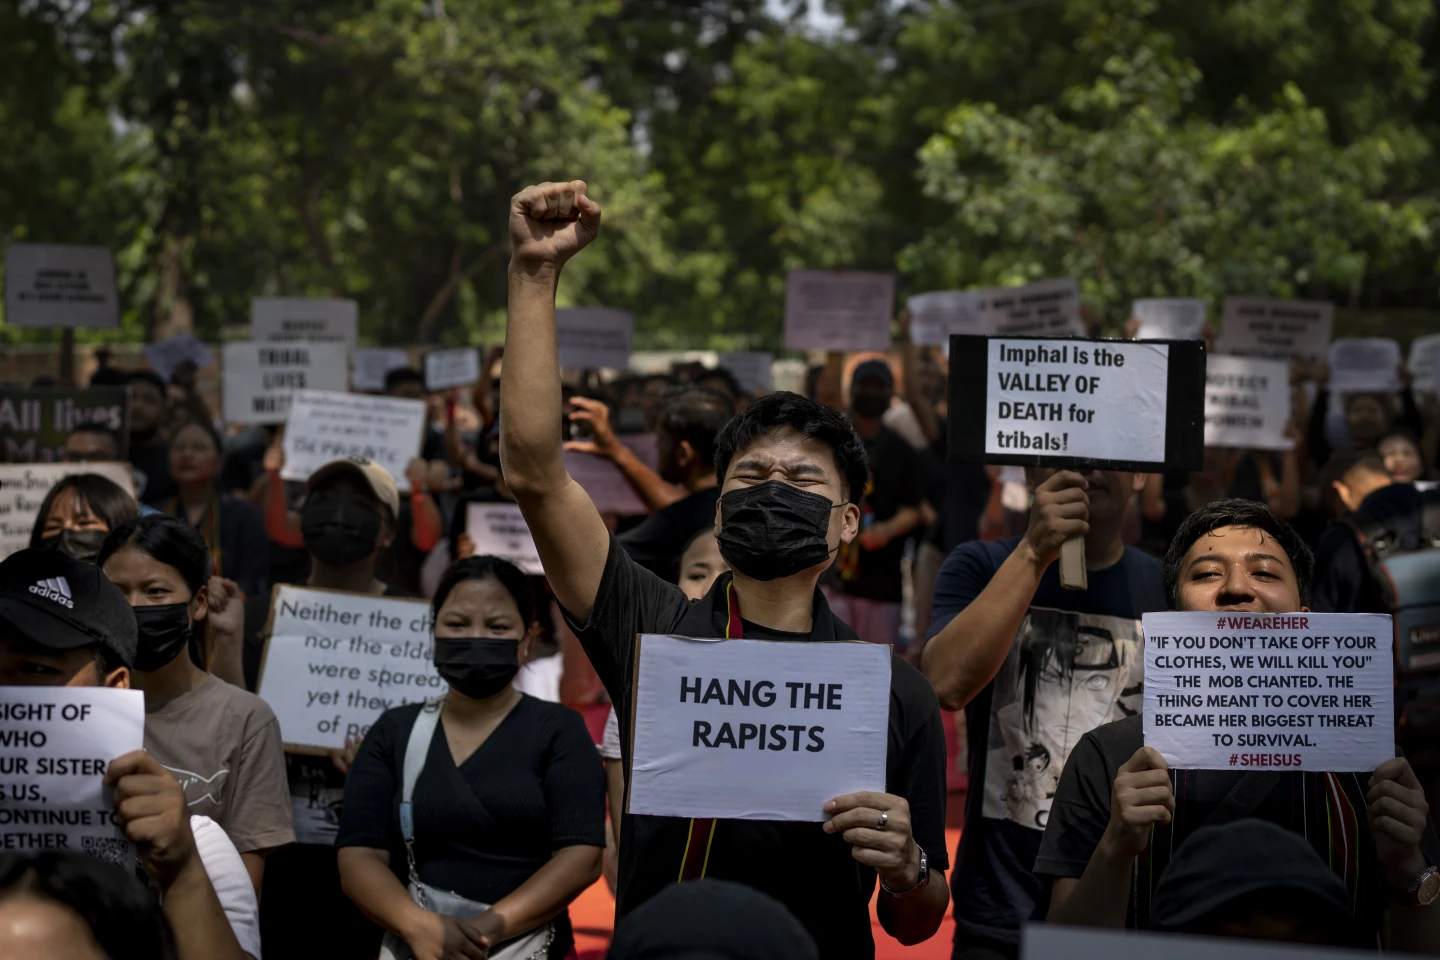 Thousands protest mob assault of women who were paraded naked in remote Indian border state